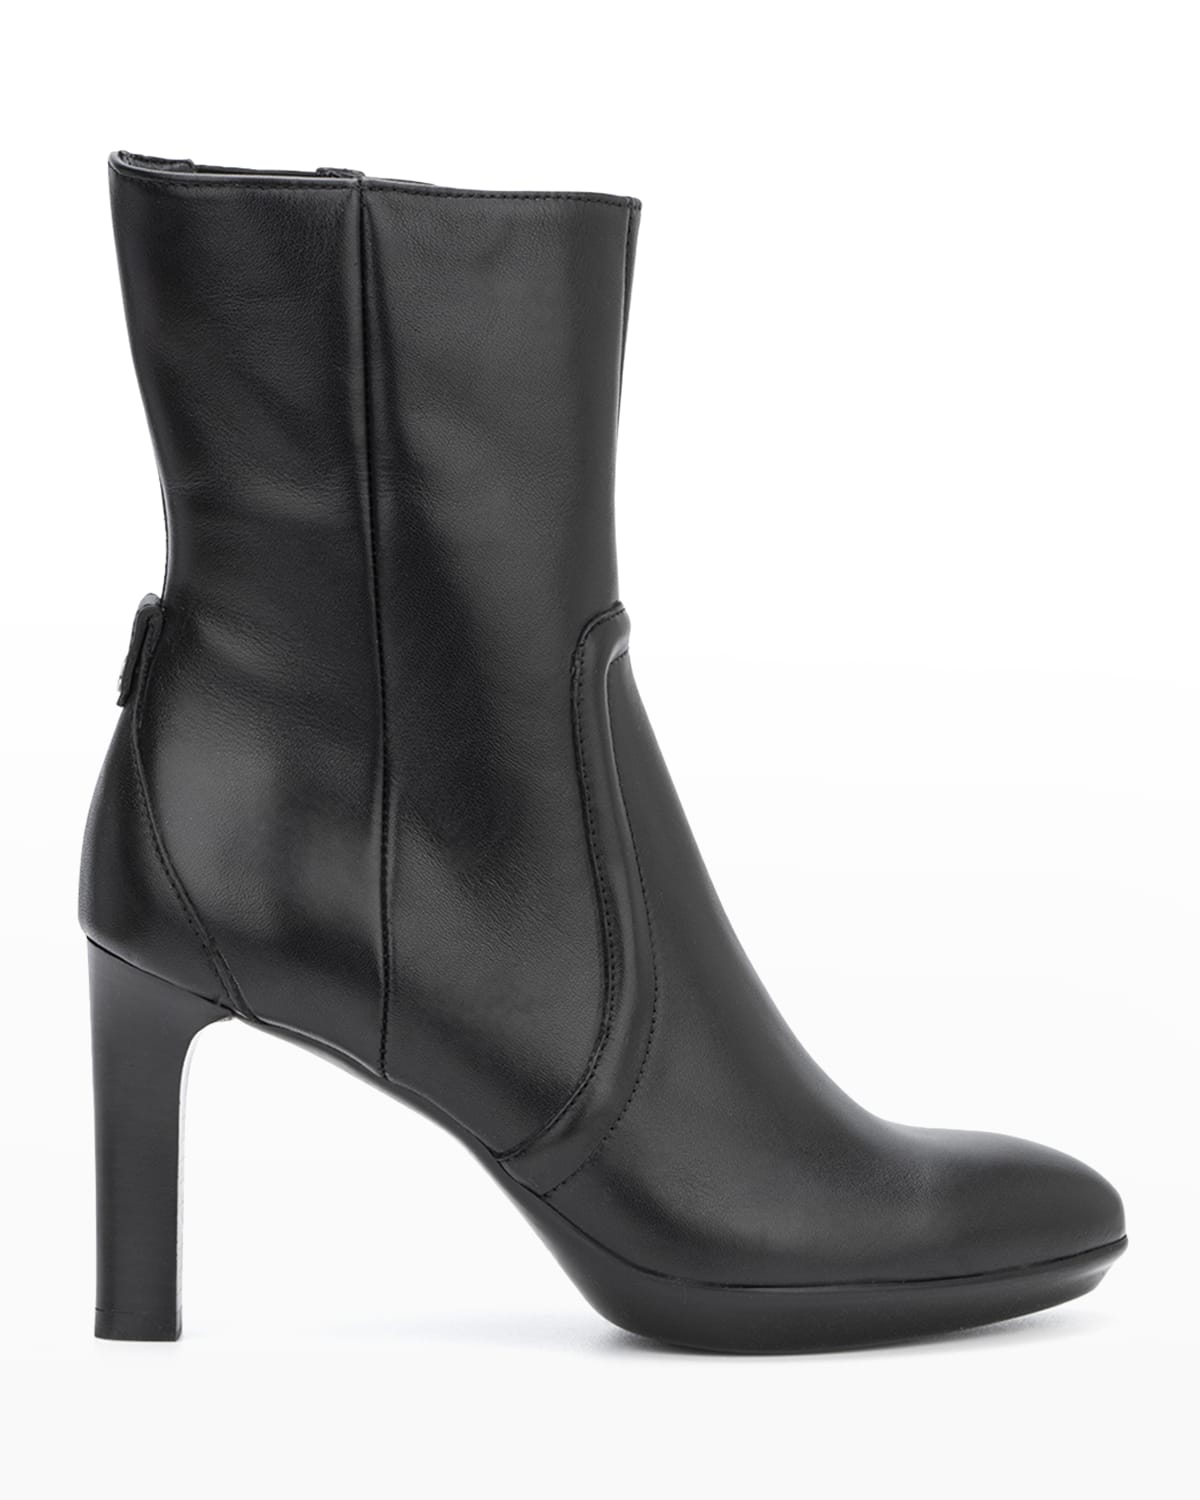 La Canadienne Tabitha Leather Ankle Booties | Neiman Marcus